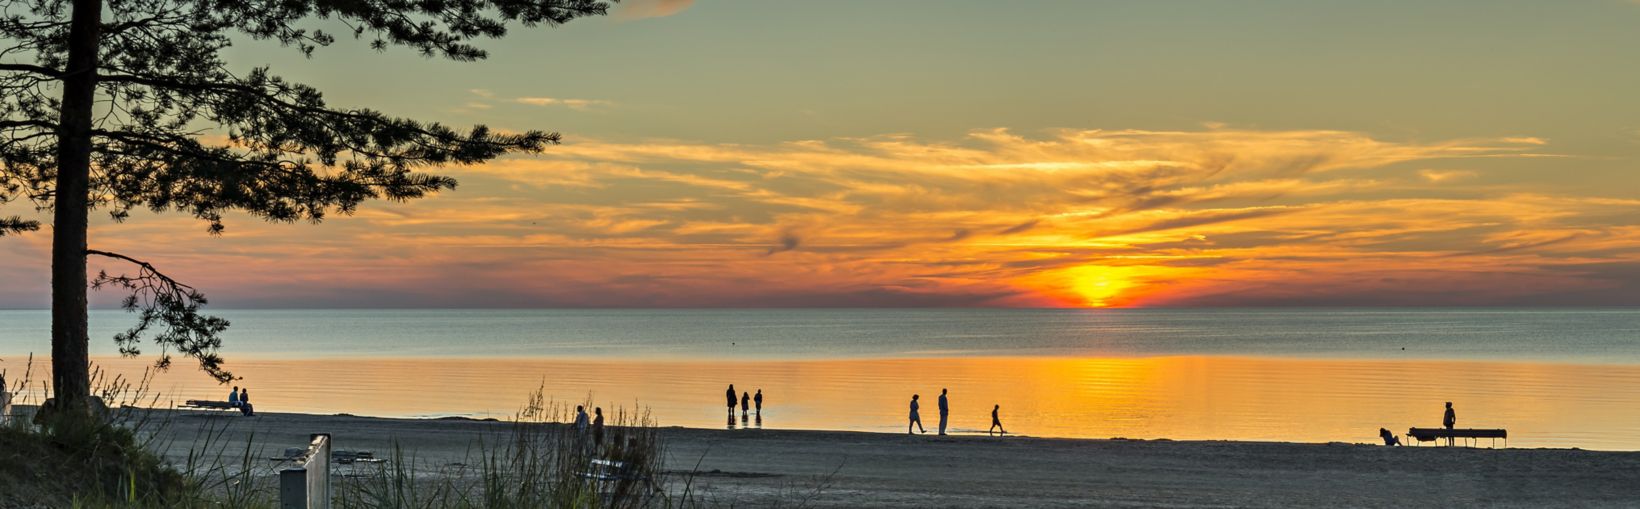 Colorful sunset at sandy beach at Jurmala - the famous resort in the Baltic region, Latvia